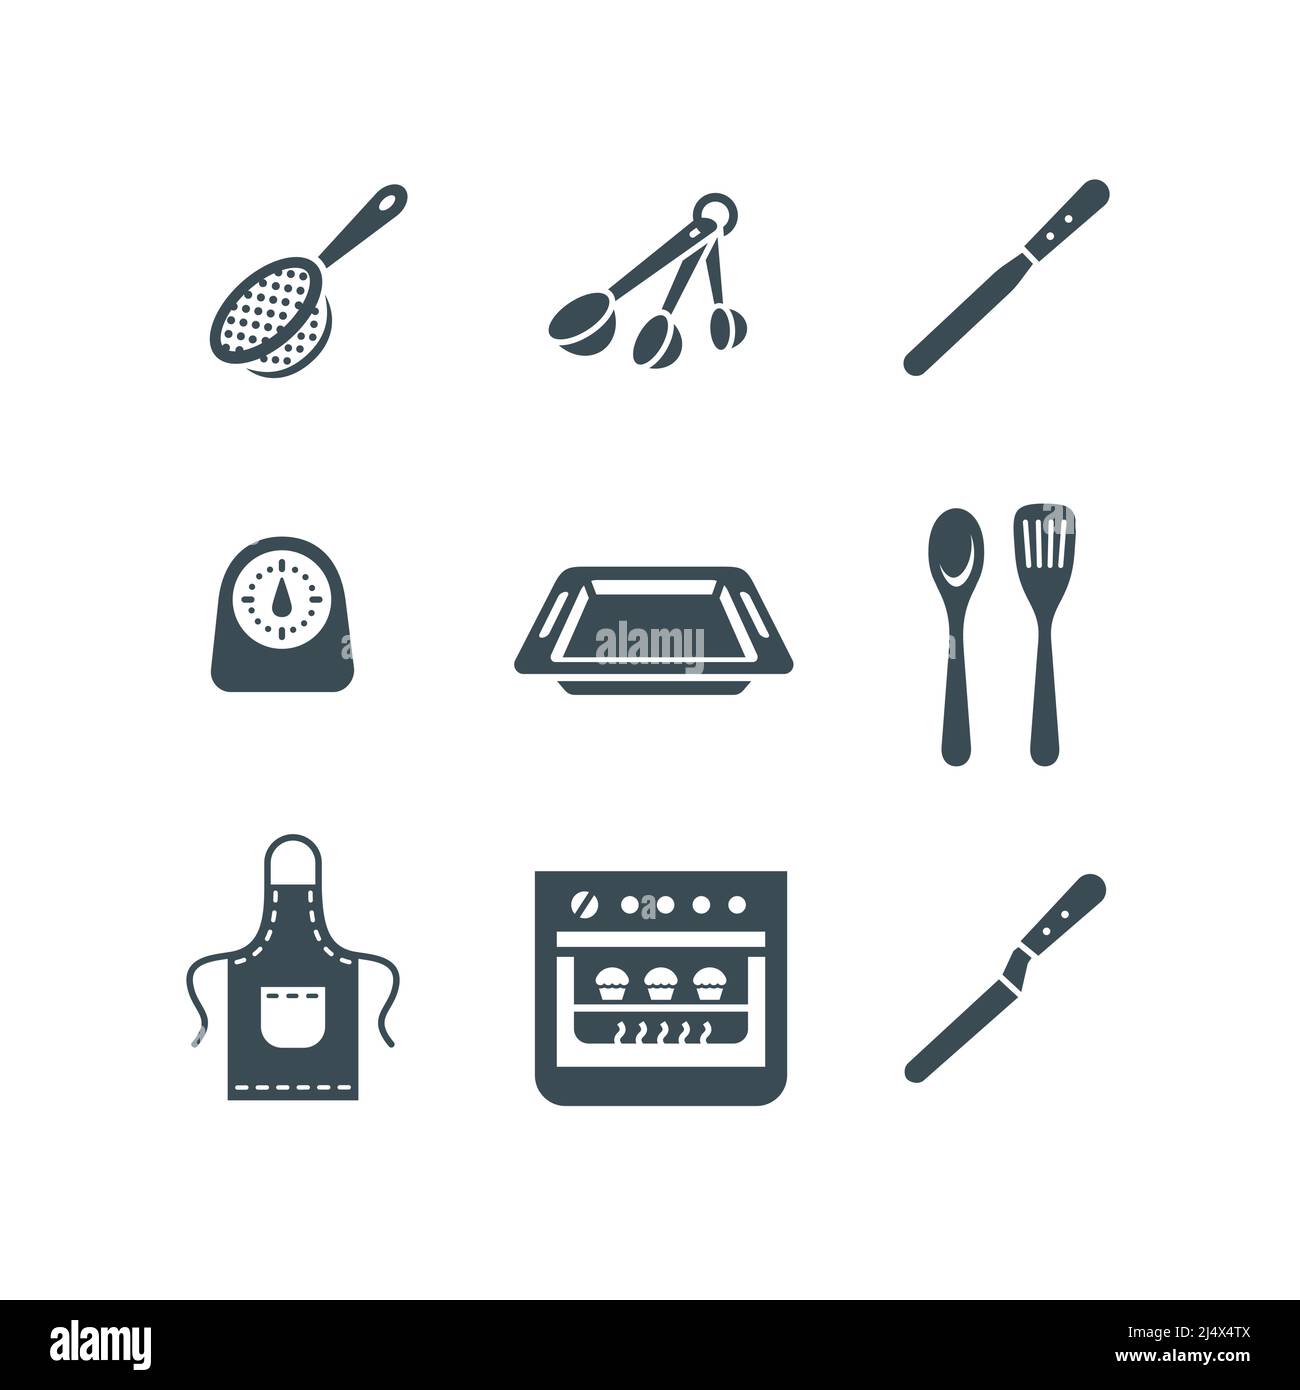 baker tools clipart icons